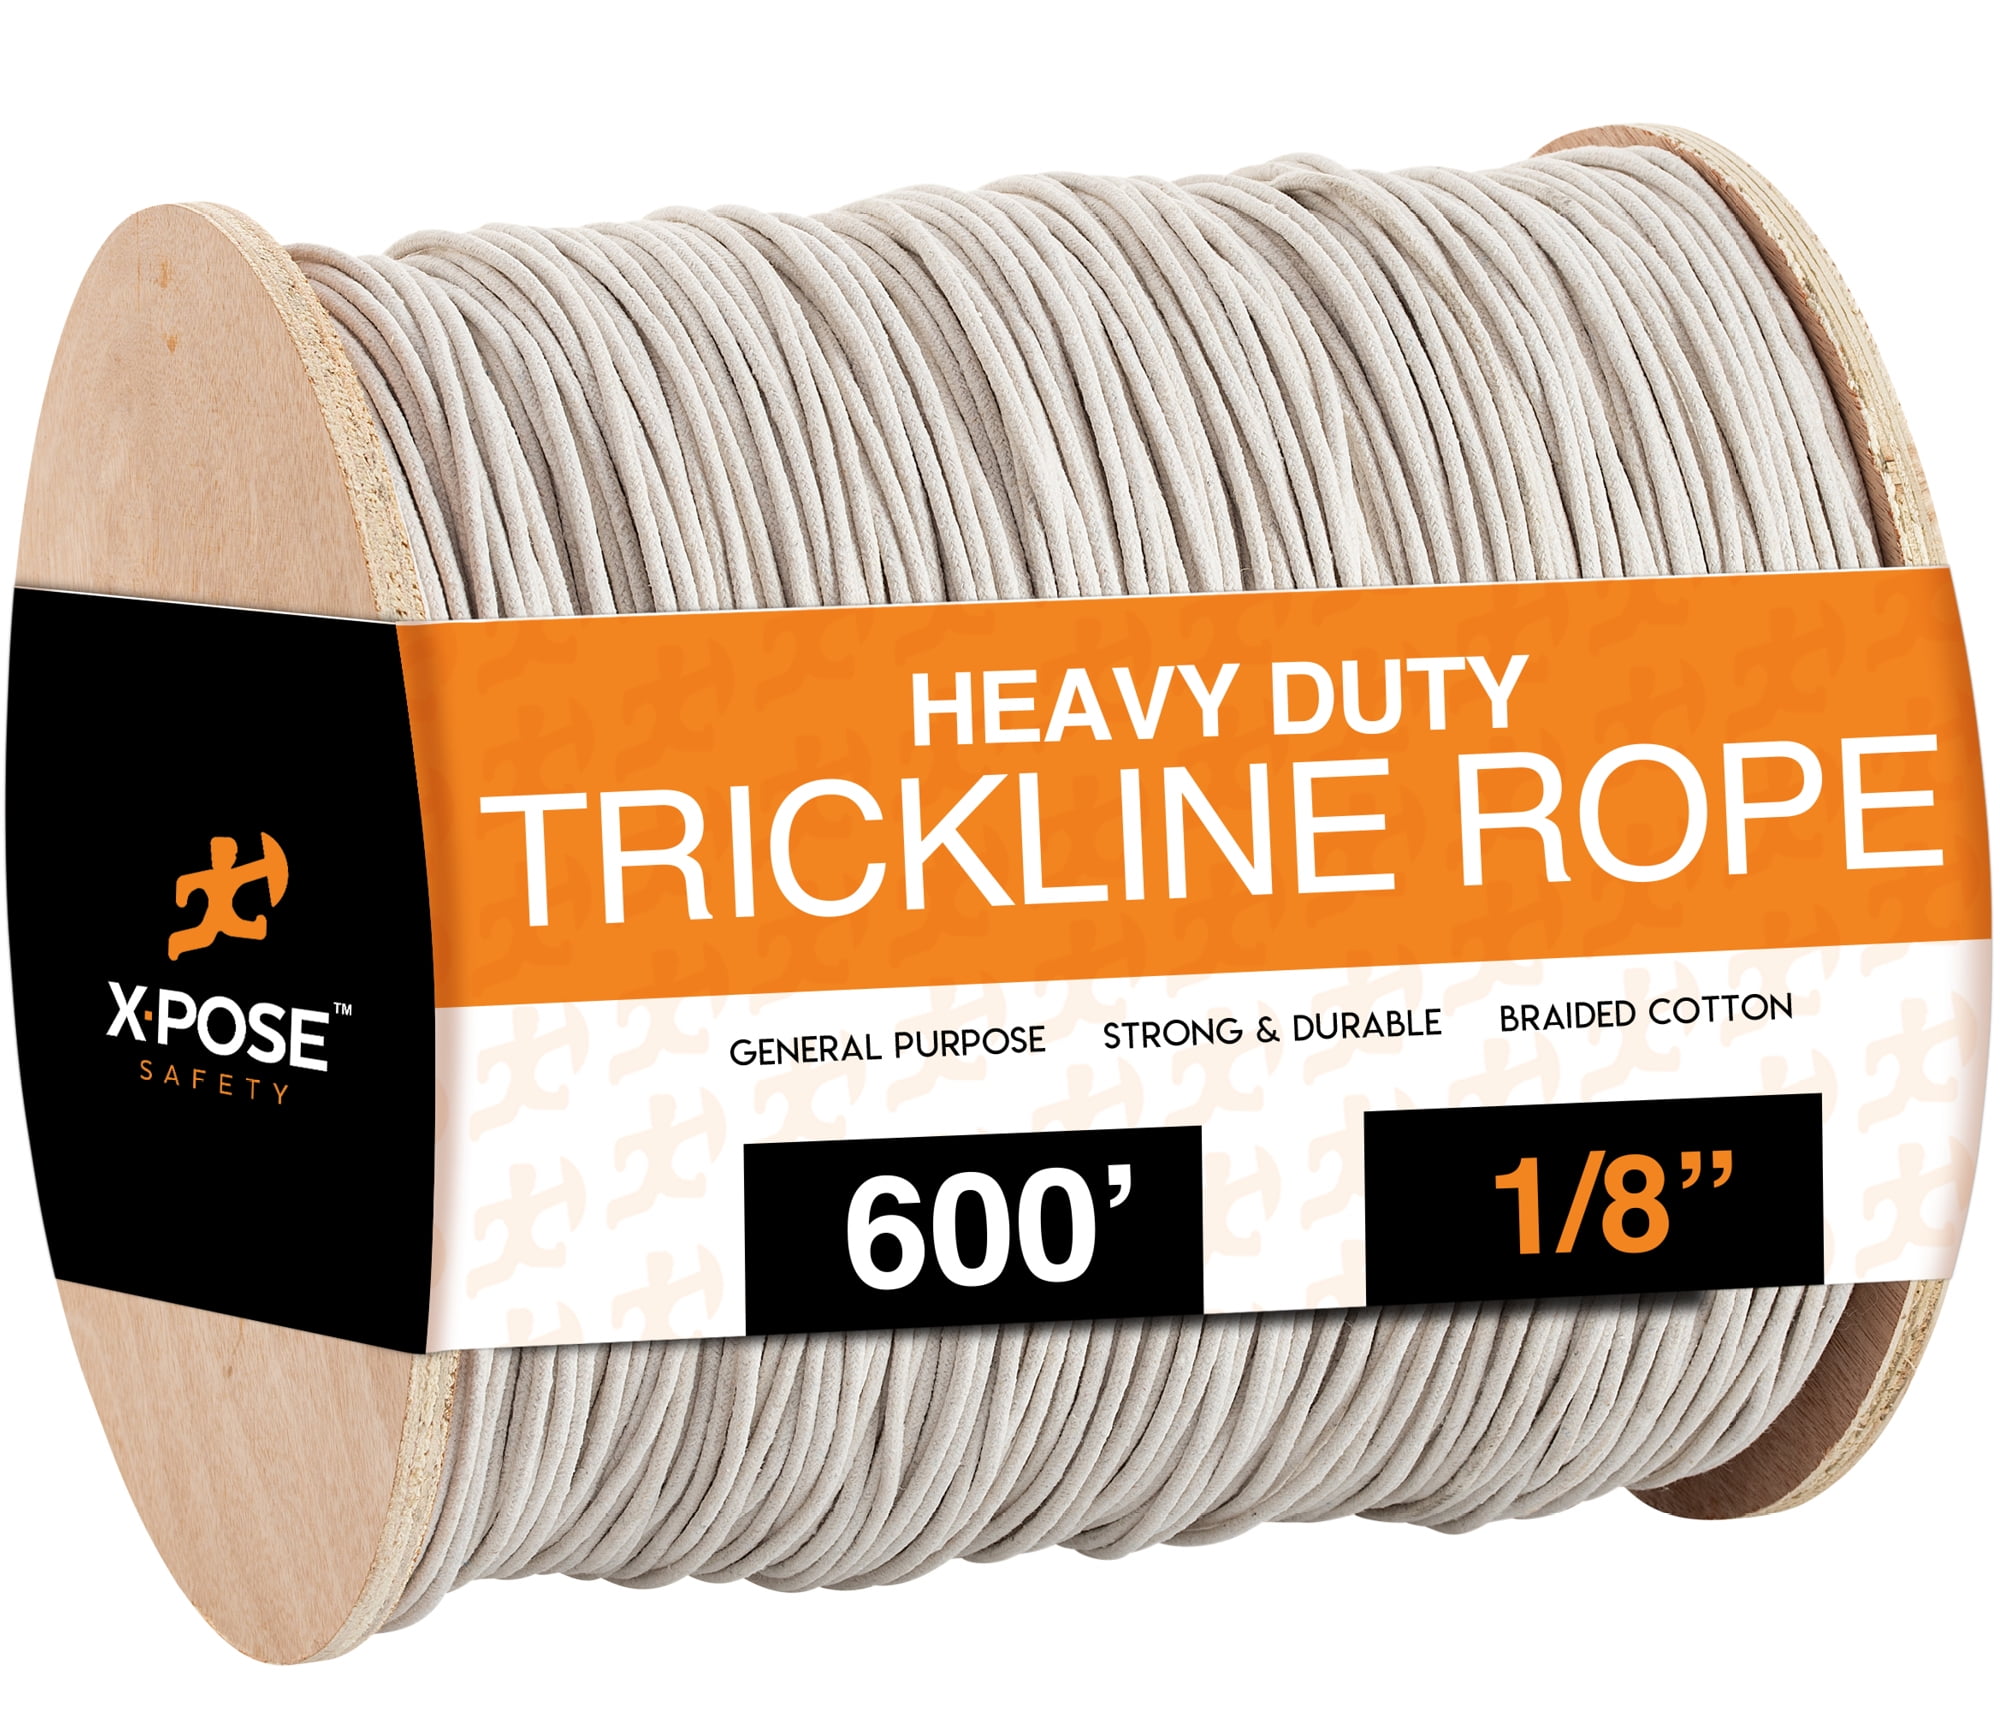 Black Unglazed Trickline Rope - 3,000 ft x 1/8 inch Theatrical Tie Line  Heavy Duty Spool, Cable Management and Wire Tie - for Theatre, Stage Decor,  Rigging and Utility Applications - Xpose Safety 